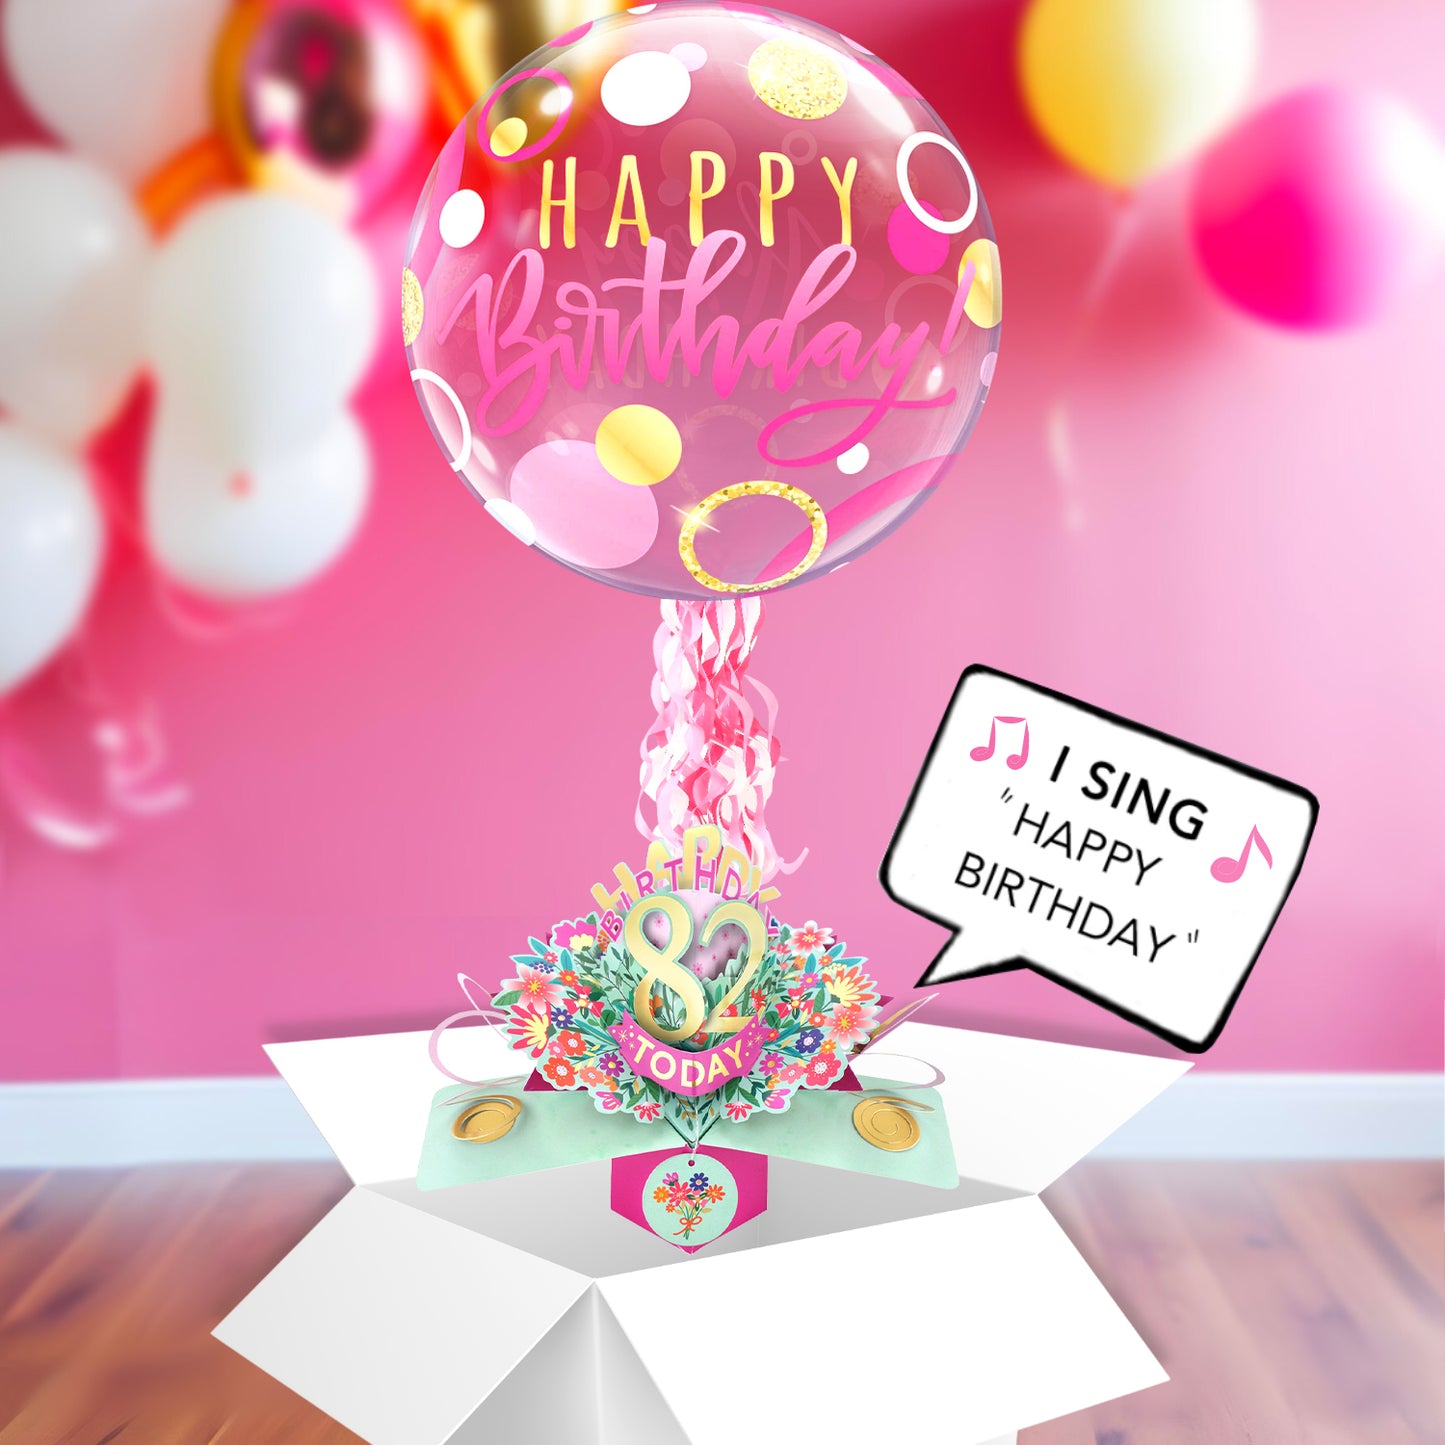 82nd Birthday Pop Up Card & Musical Balloon Surprise Delivered In A Box For Her